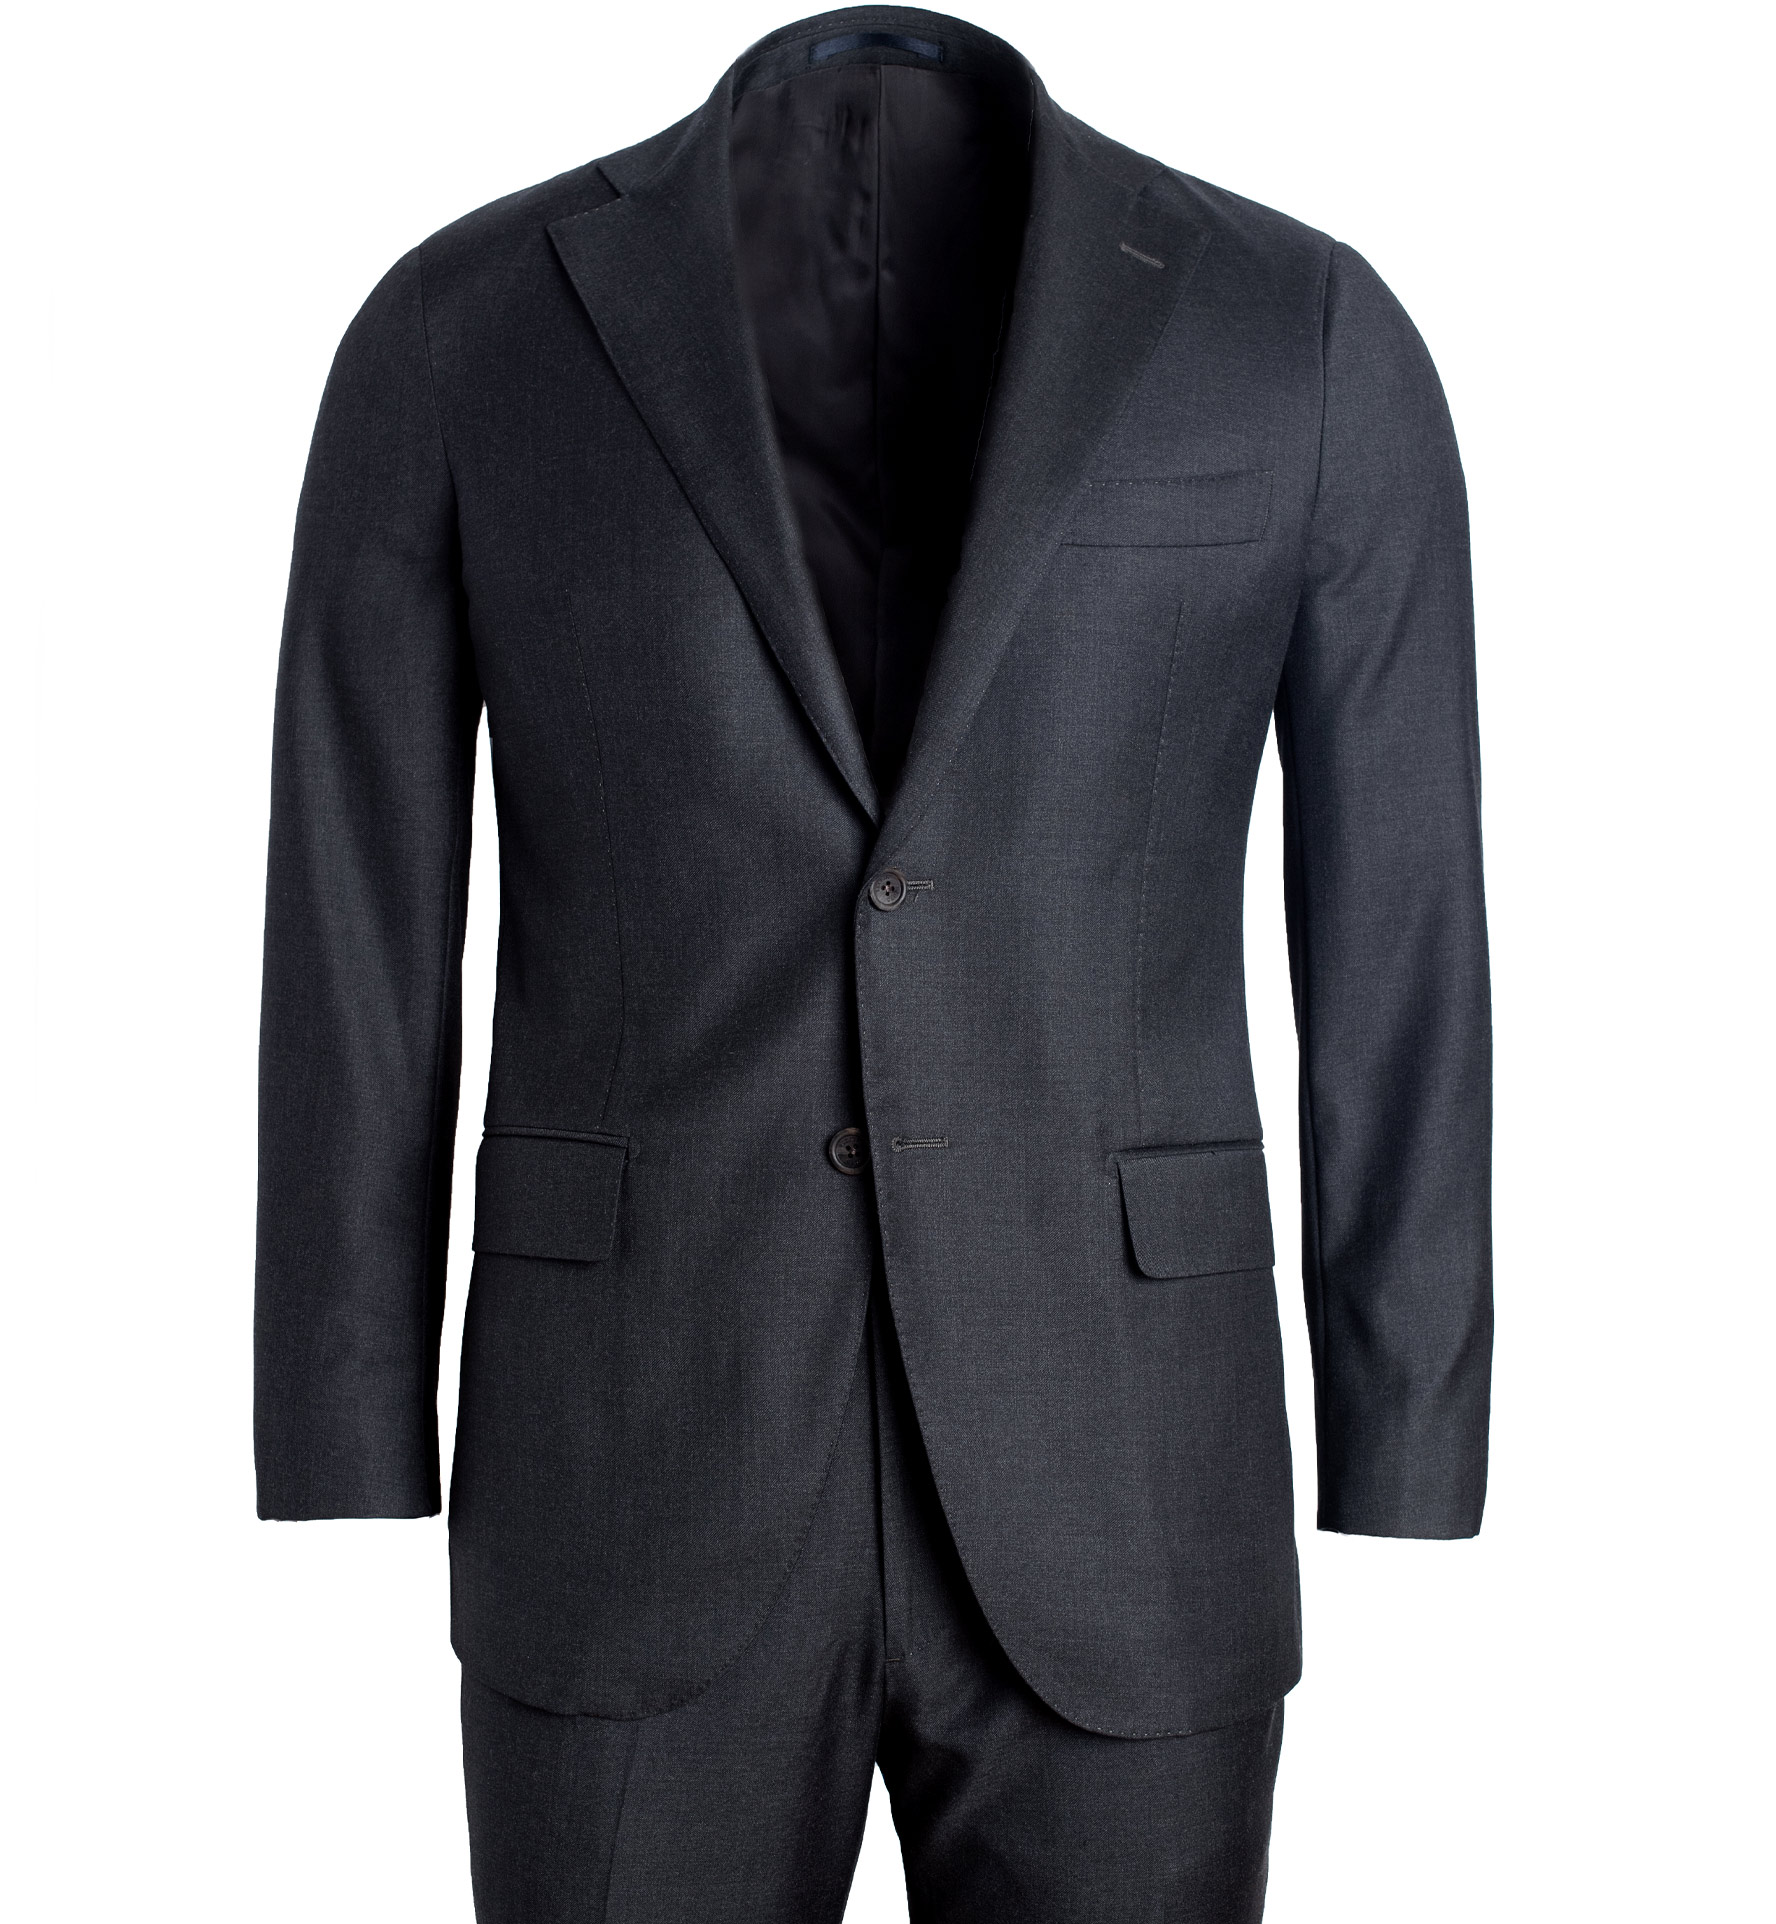 Allen VBC Grey S110s Wool Suit - Custom Fit Tailored Clothing